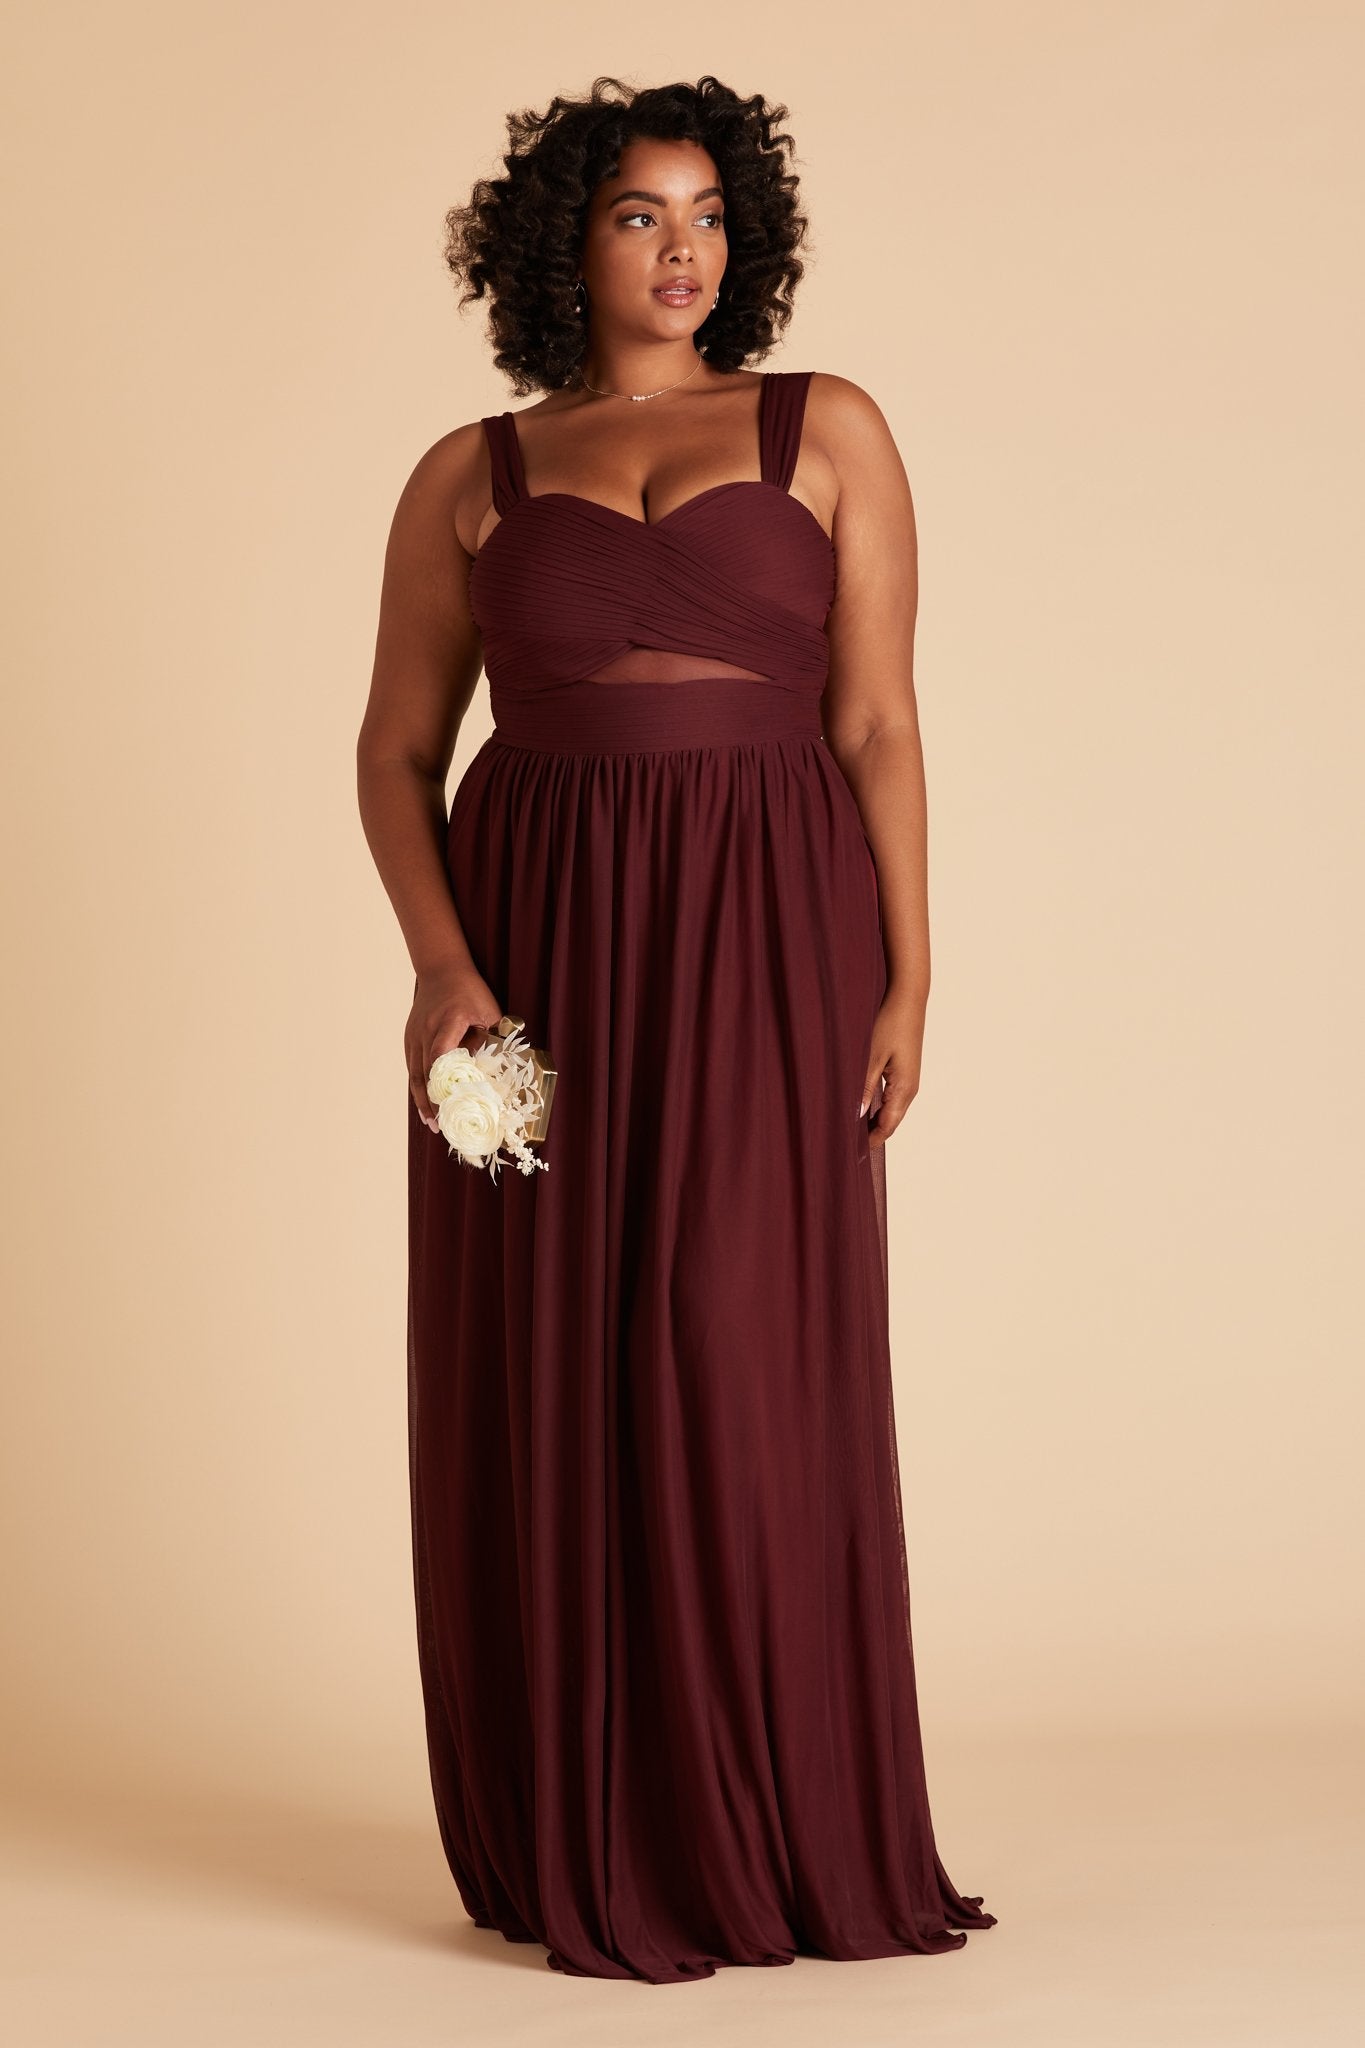 Elsye plus size bridesmaid dress in cabernet burgundy chiffon by Birdy Grey, front view